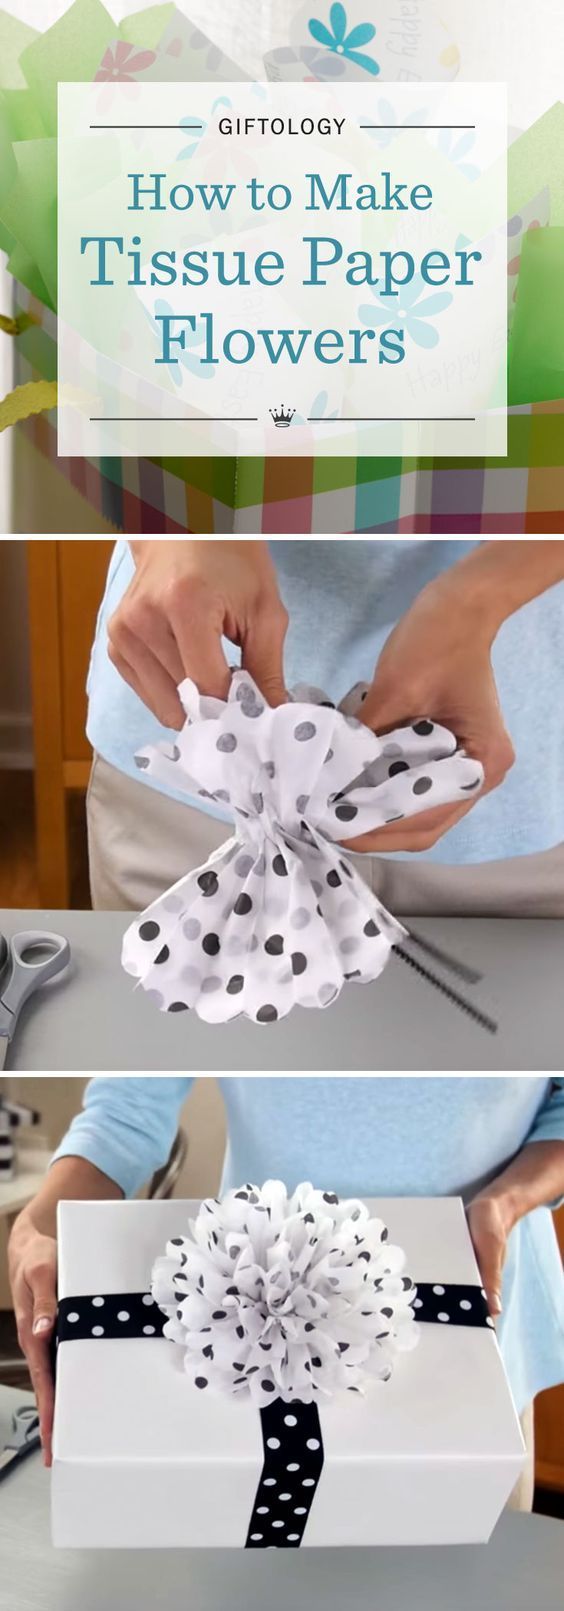 Giftology: How to Make Tissue Paper Flowers | Learn the art of gift wrapping from the experts at Hallmark. Watch our easy video